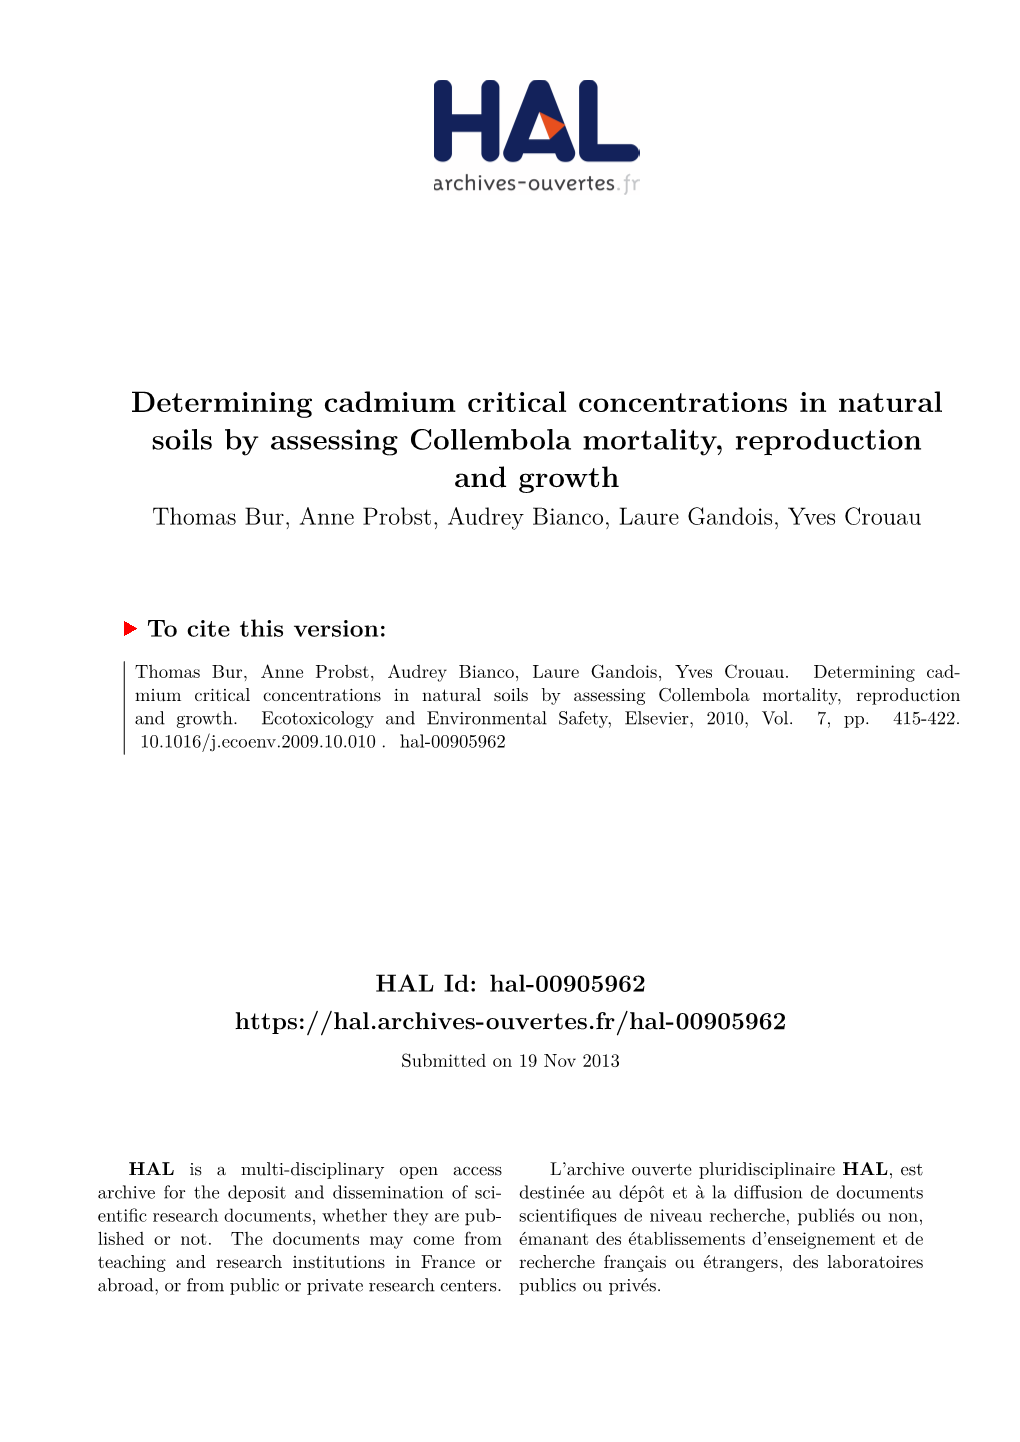 Determining Cadmium Critical Concentrations in Natural Soils By